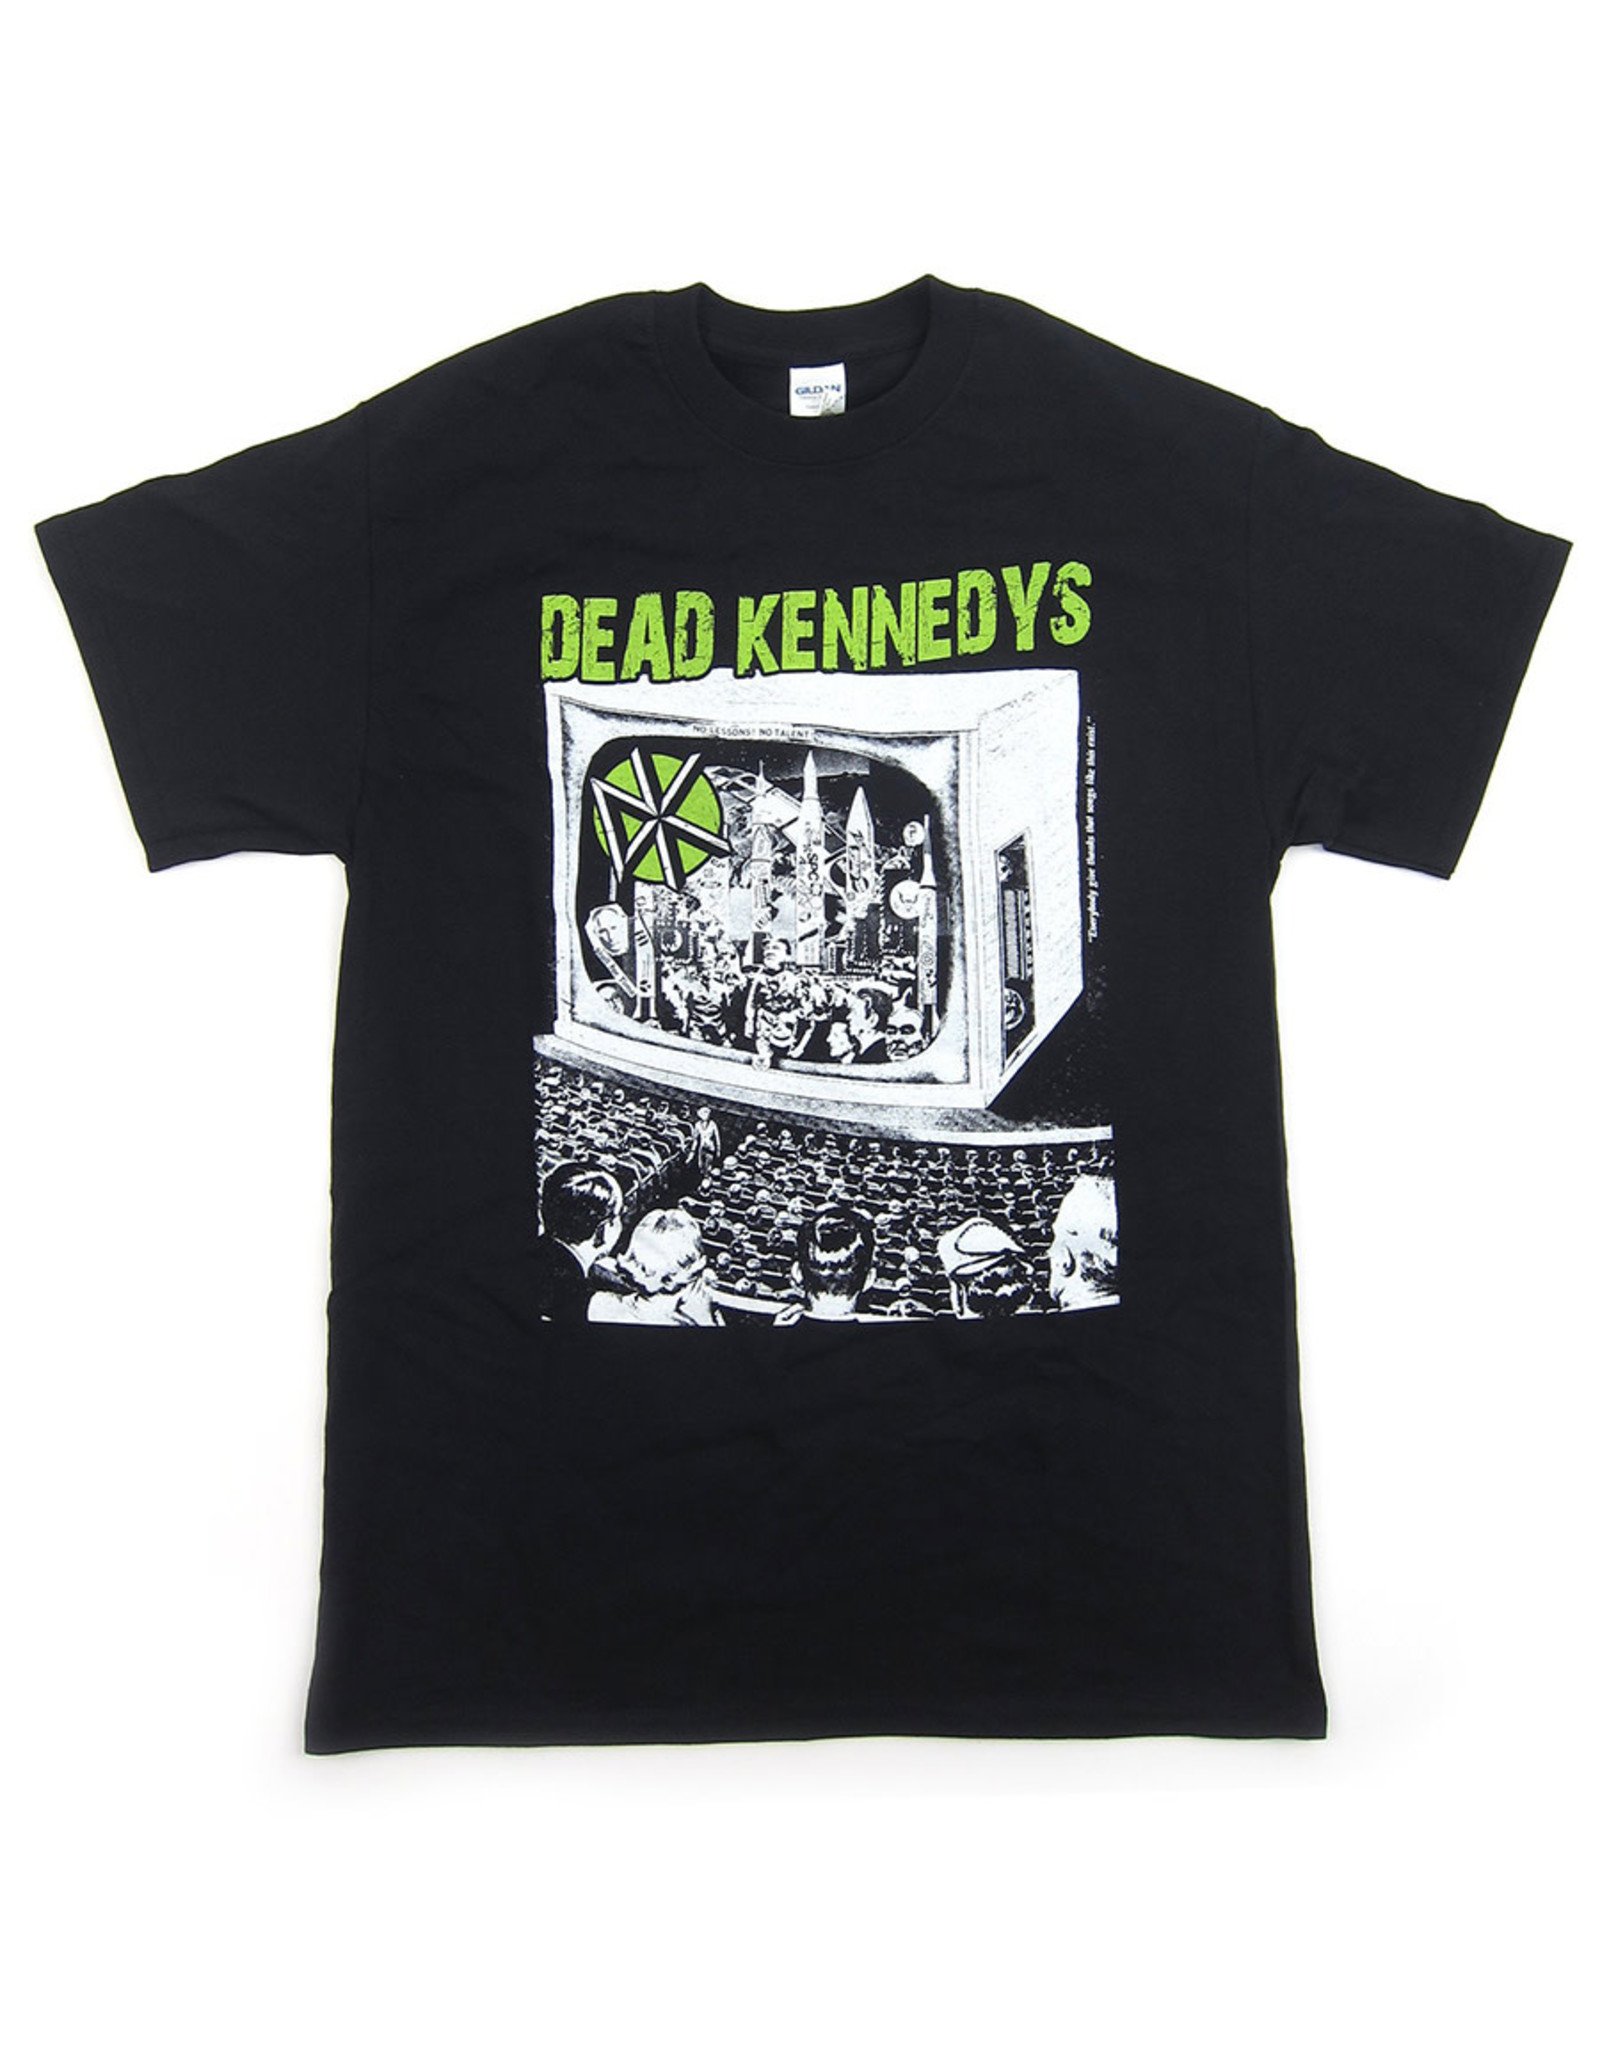 Star 500 Concert Series On Hollywood Tee Dead Kennedys 2016 Invasion S/S (Black)